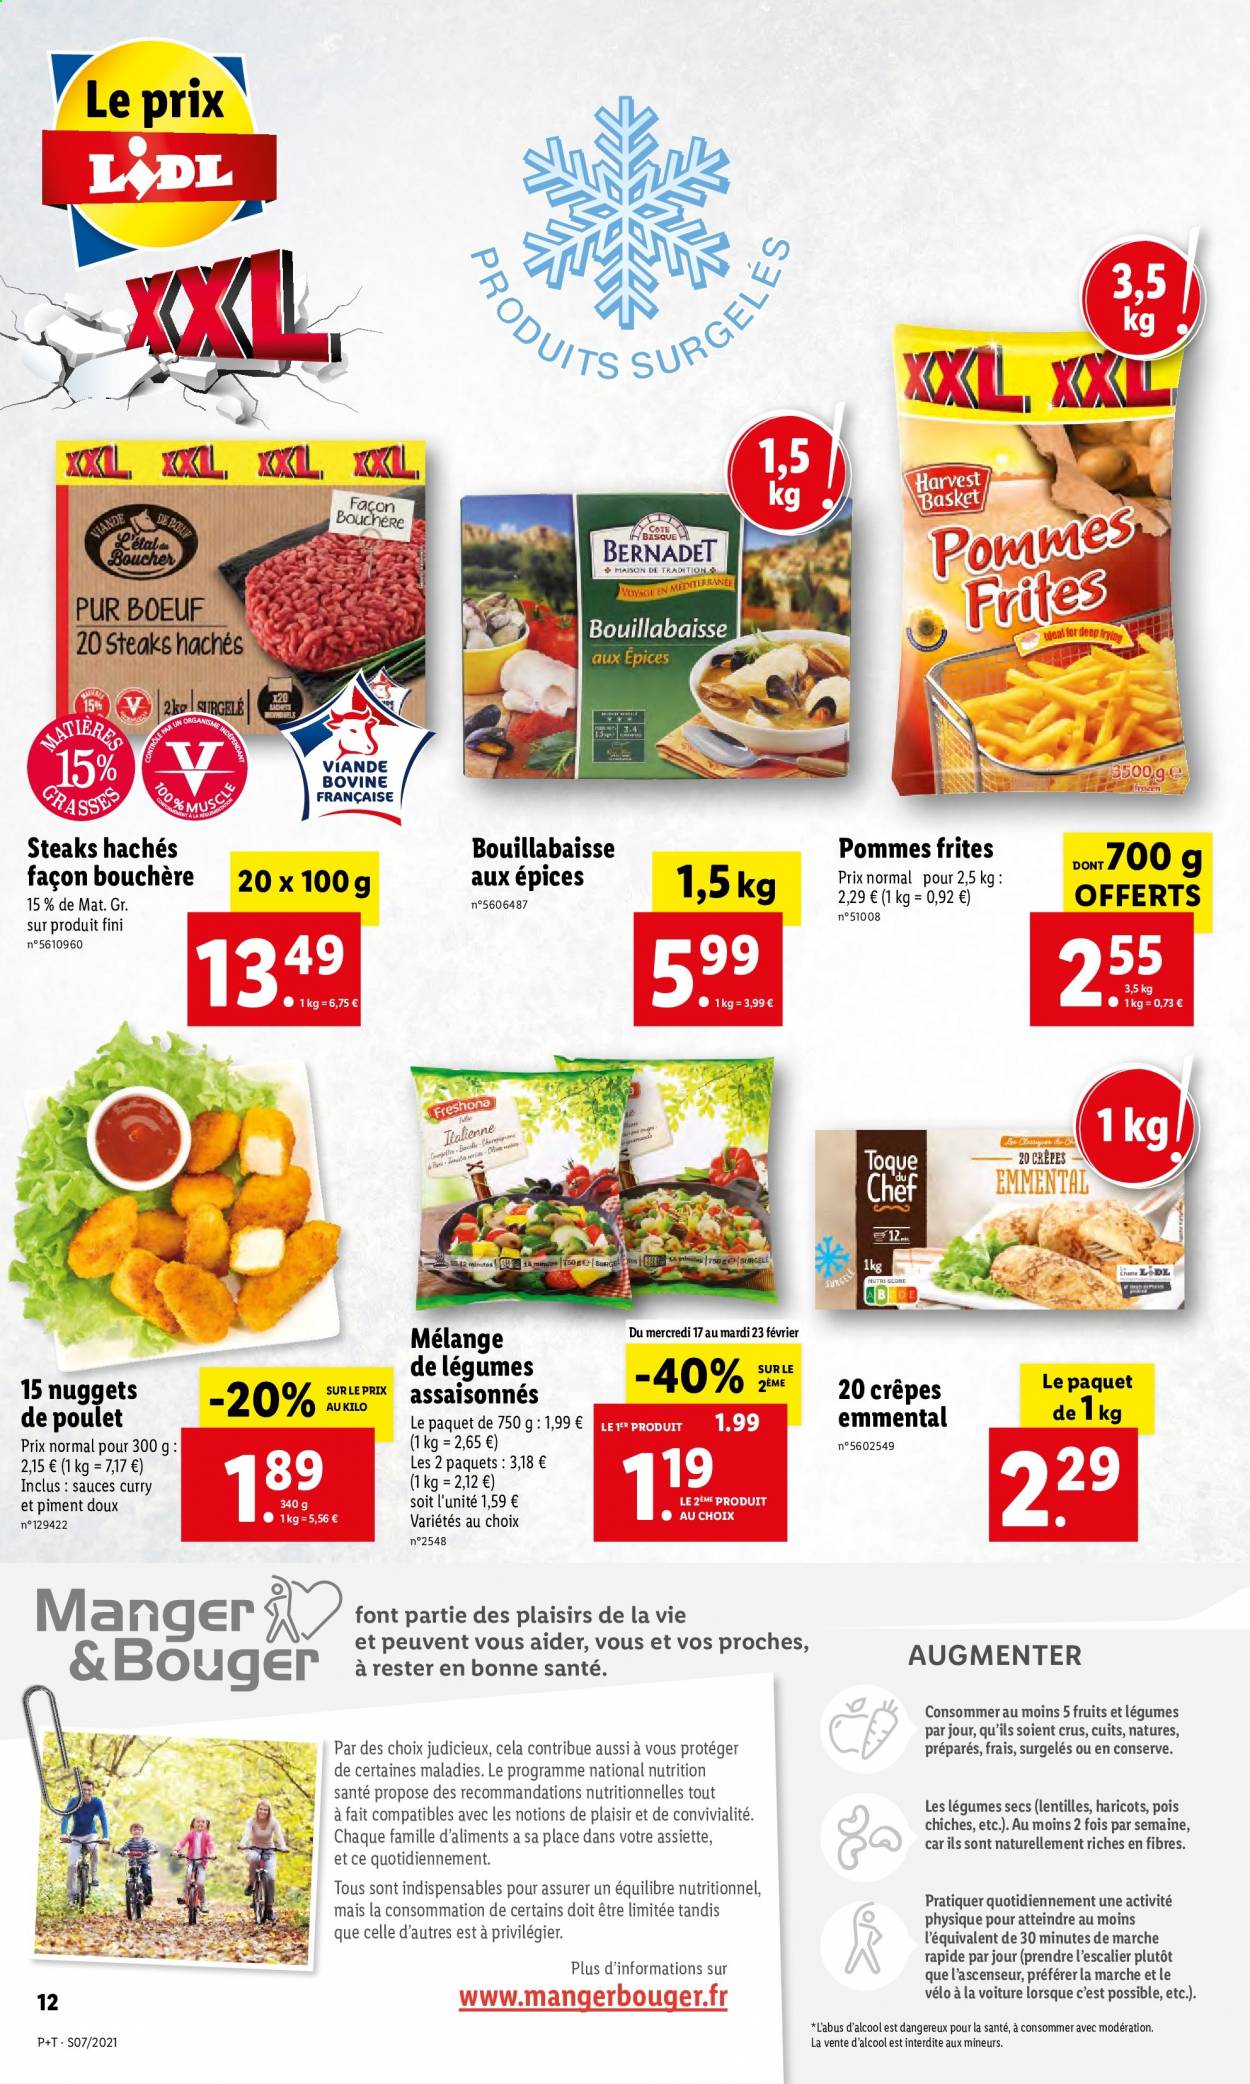 Catalogue Lidl - 17.02.2021 - 23.02.2021. Page 12.